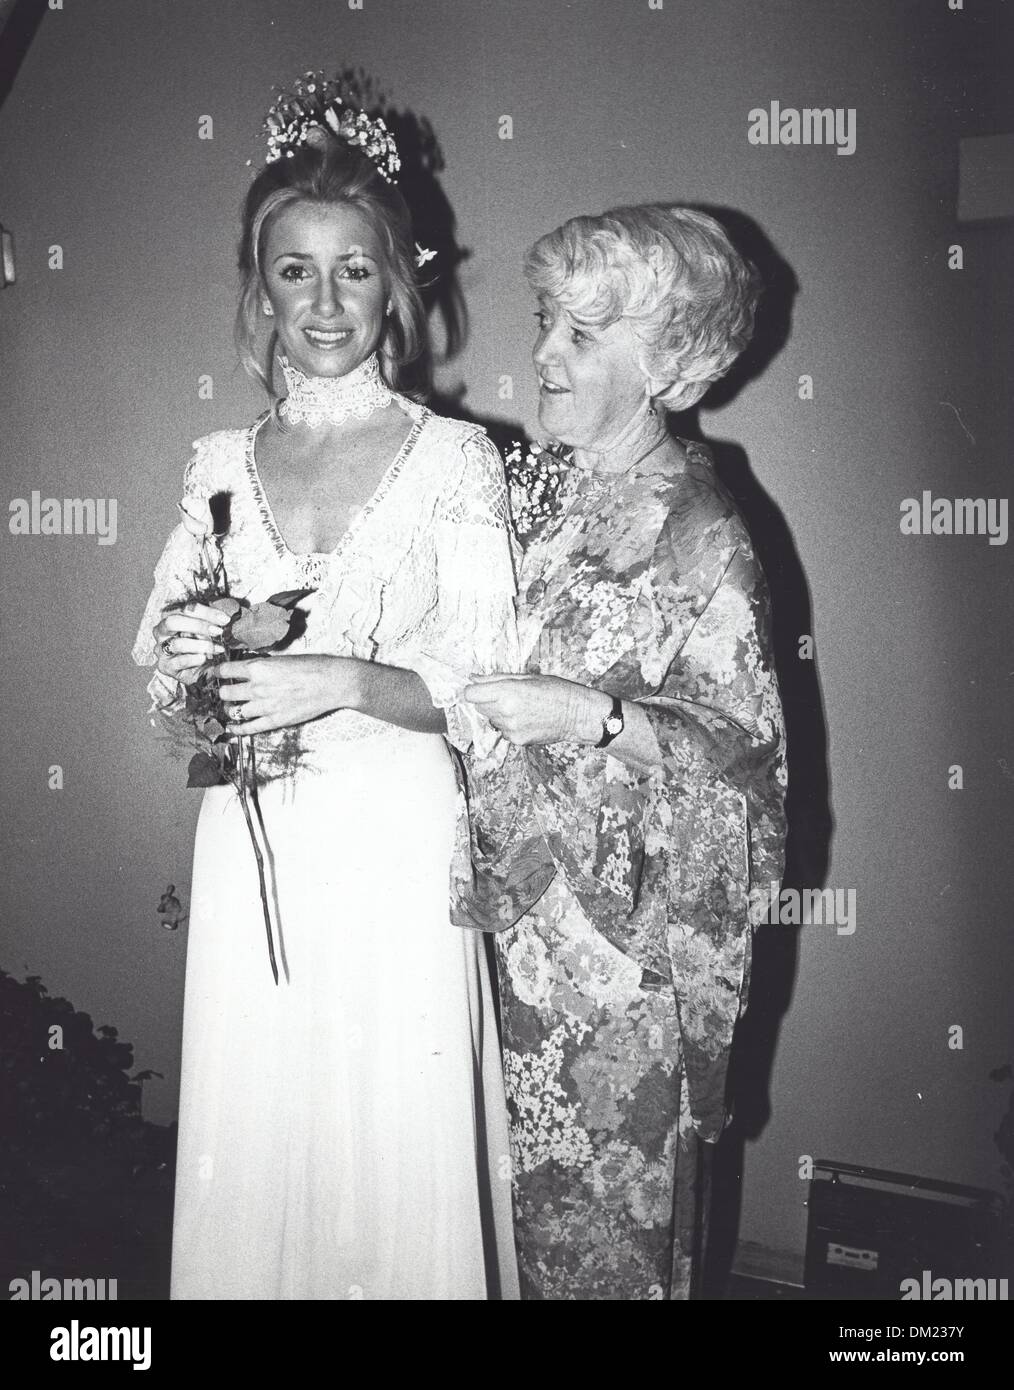 SUZANNE SOMERS with mother during her wedding.Supplied by Photos, inc.(Credit Image: © Supplied By Globe Photos, Inc/Globe Photos/ZUMAPRESS.com) Stock Photo